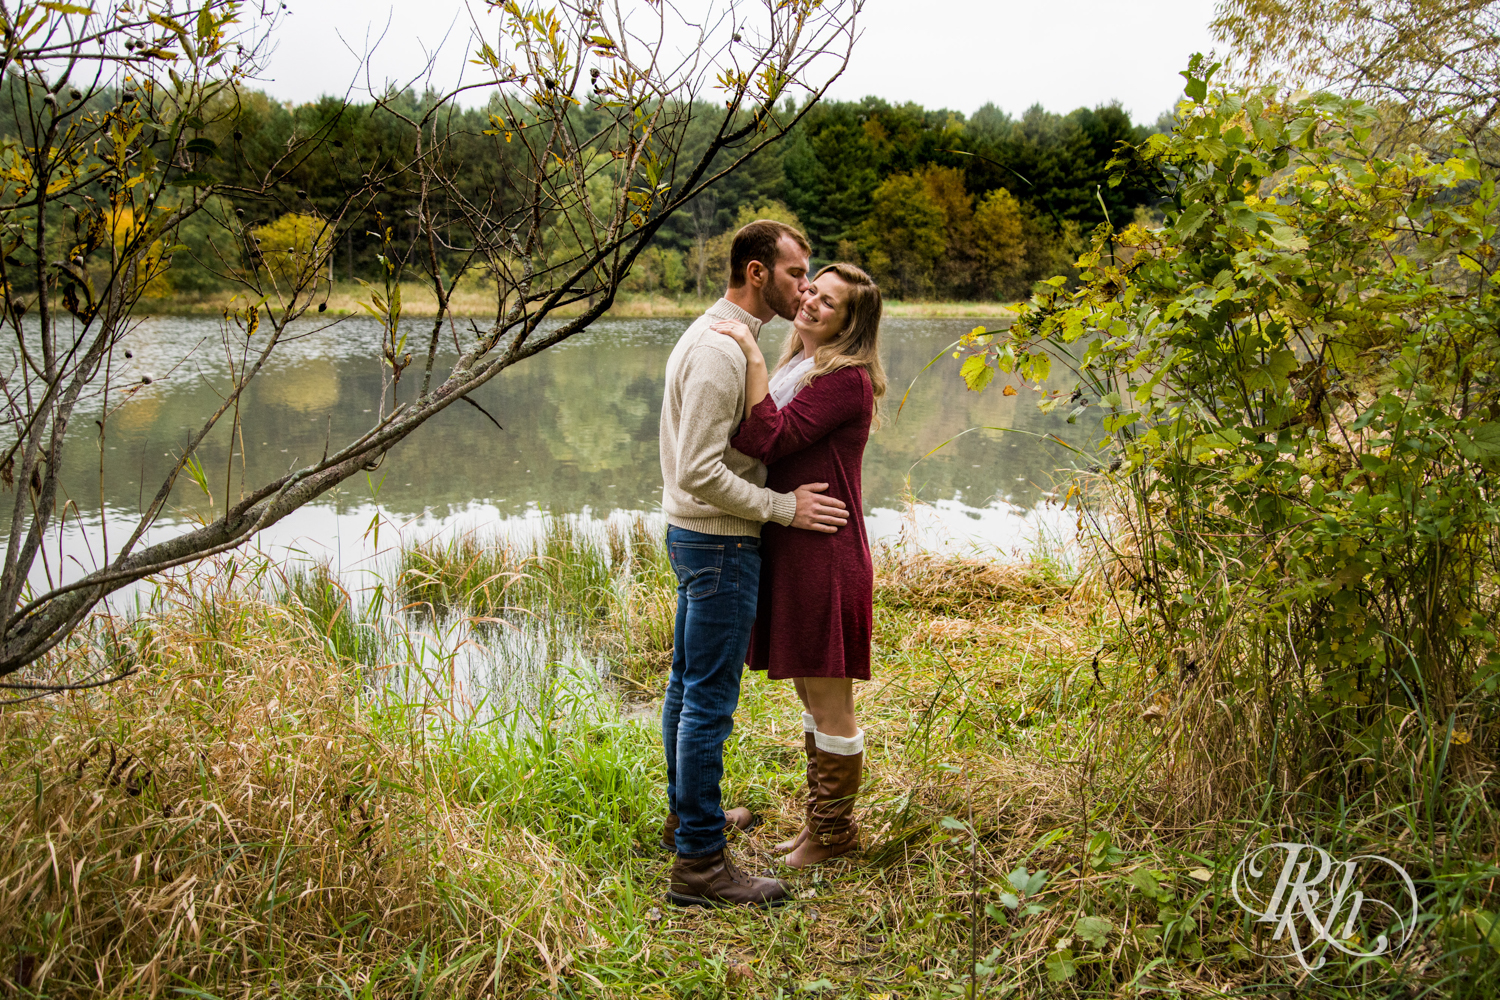 Man in sweater and woman in red dress kiss at Lebanon Hills Regional Park in Eagan, Minnesota.